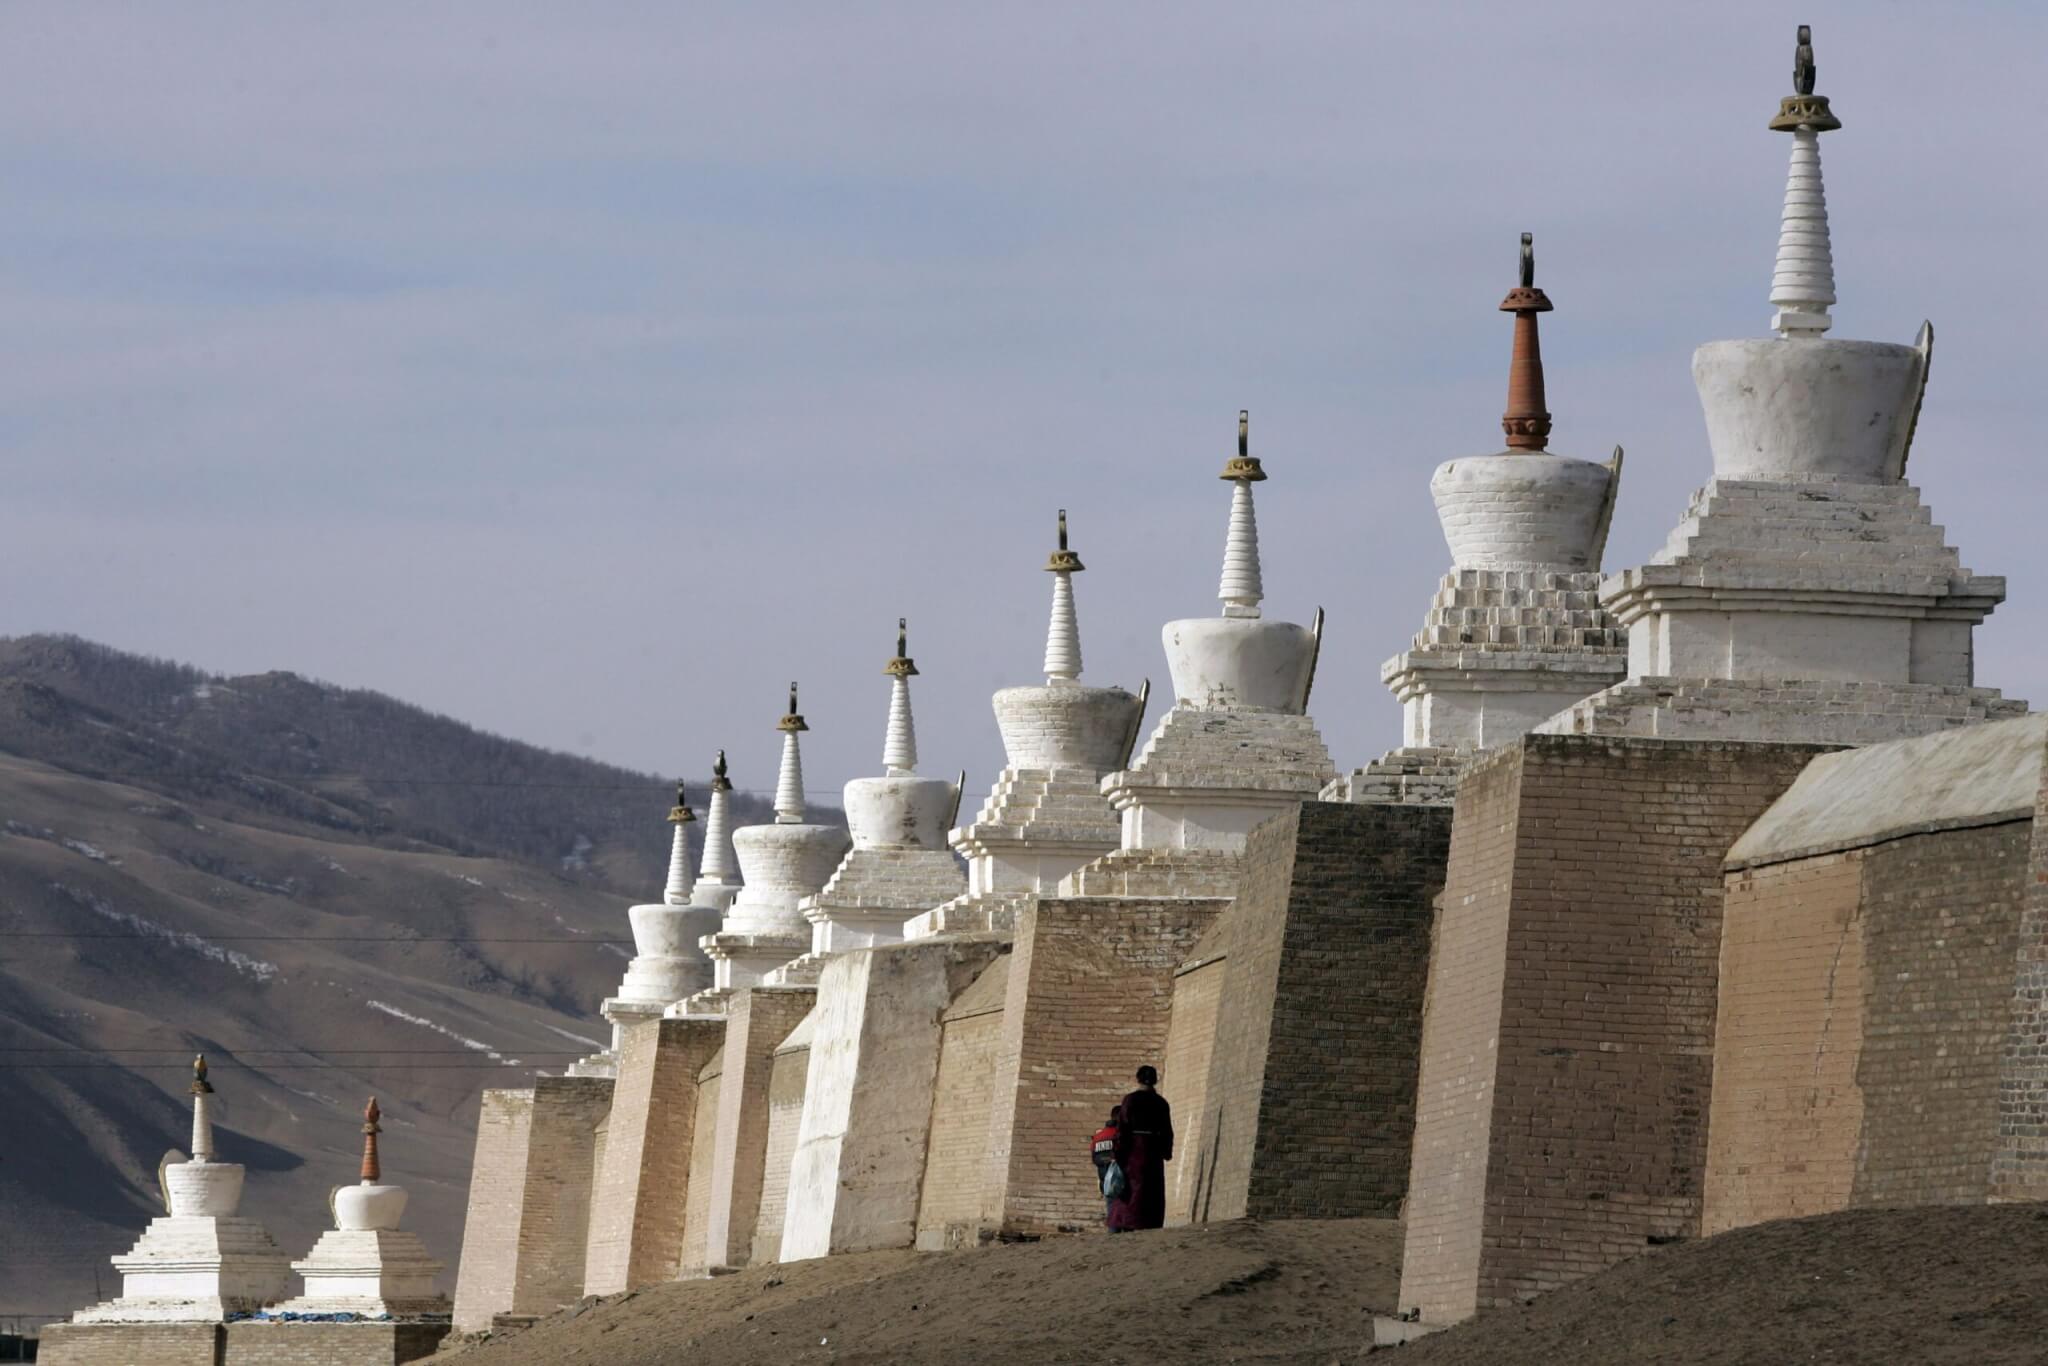 Mongolian Pilgrims Walk at the Base of Some of the 108 Stupas at the Erdene Zuu Monastery Mongolia's 16th Century Monastery of the Yellow Hat Sect of Buddhism Currently Maintained by 60 Monks in Karakorum Mongolia Saturday 04 February 2006 the Monastery Was Built On the Site of Chingis (genghis) Khan's Capital City Karakorum About Three Centuries After the City Was Destroyed by Manchurian Soldiers in the 14th Century Mongolia Celebrates It's Historical Heritage During 2006 As the 800th Anniversary of the Year Clan Leader Temujin Was Officially Proclaimed Chingis Khan and Founded the Great State of Mongolia